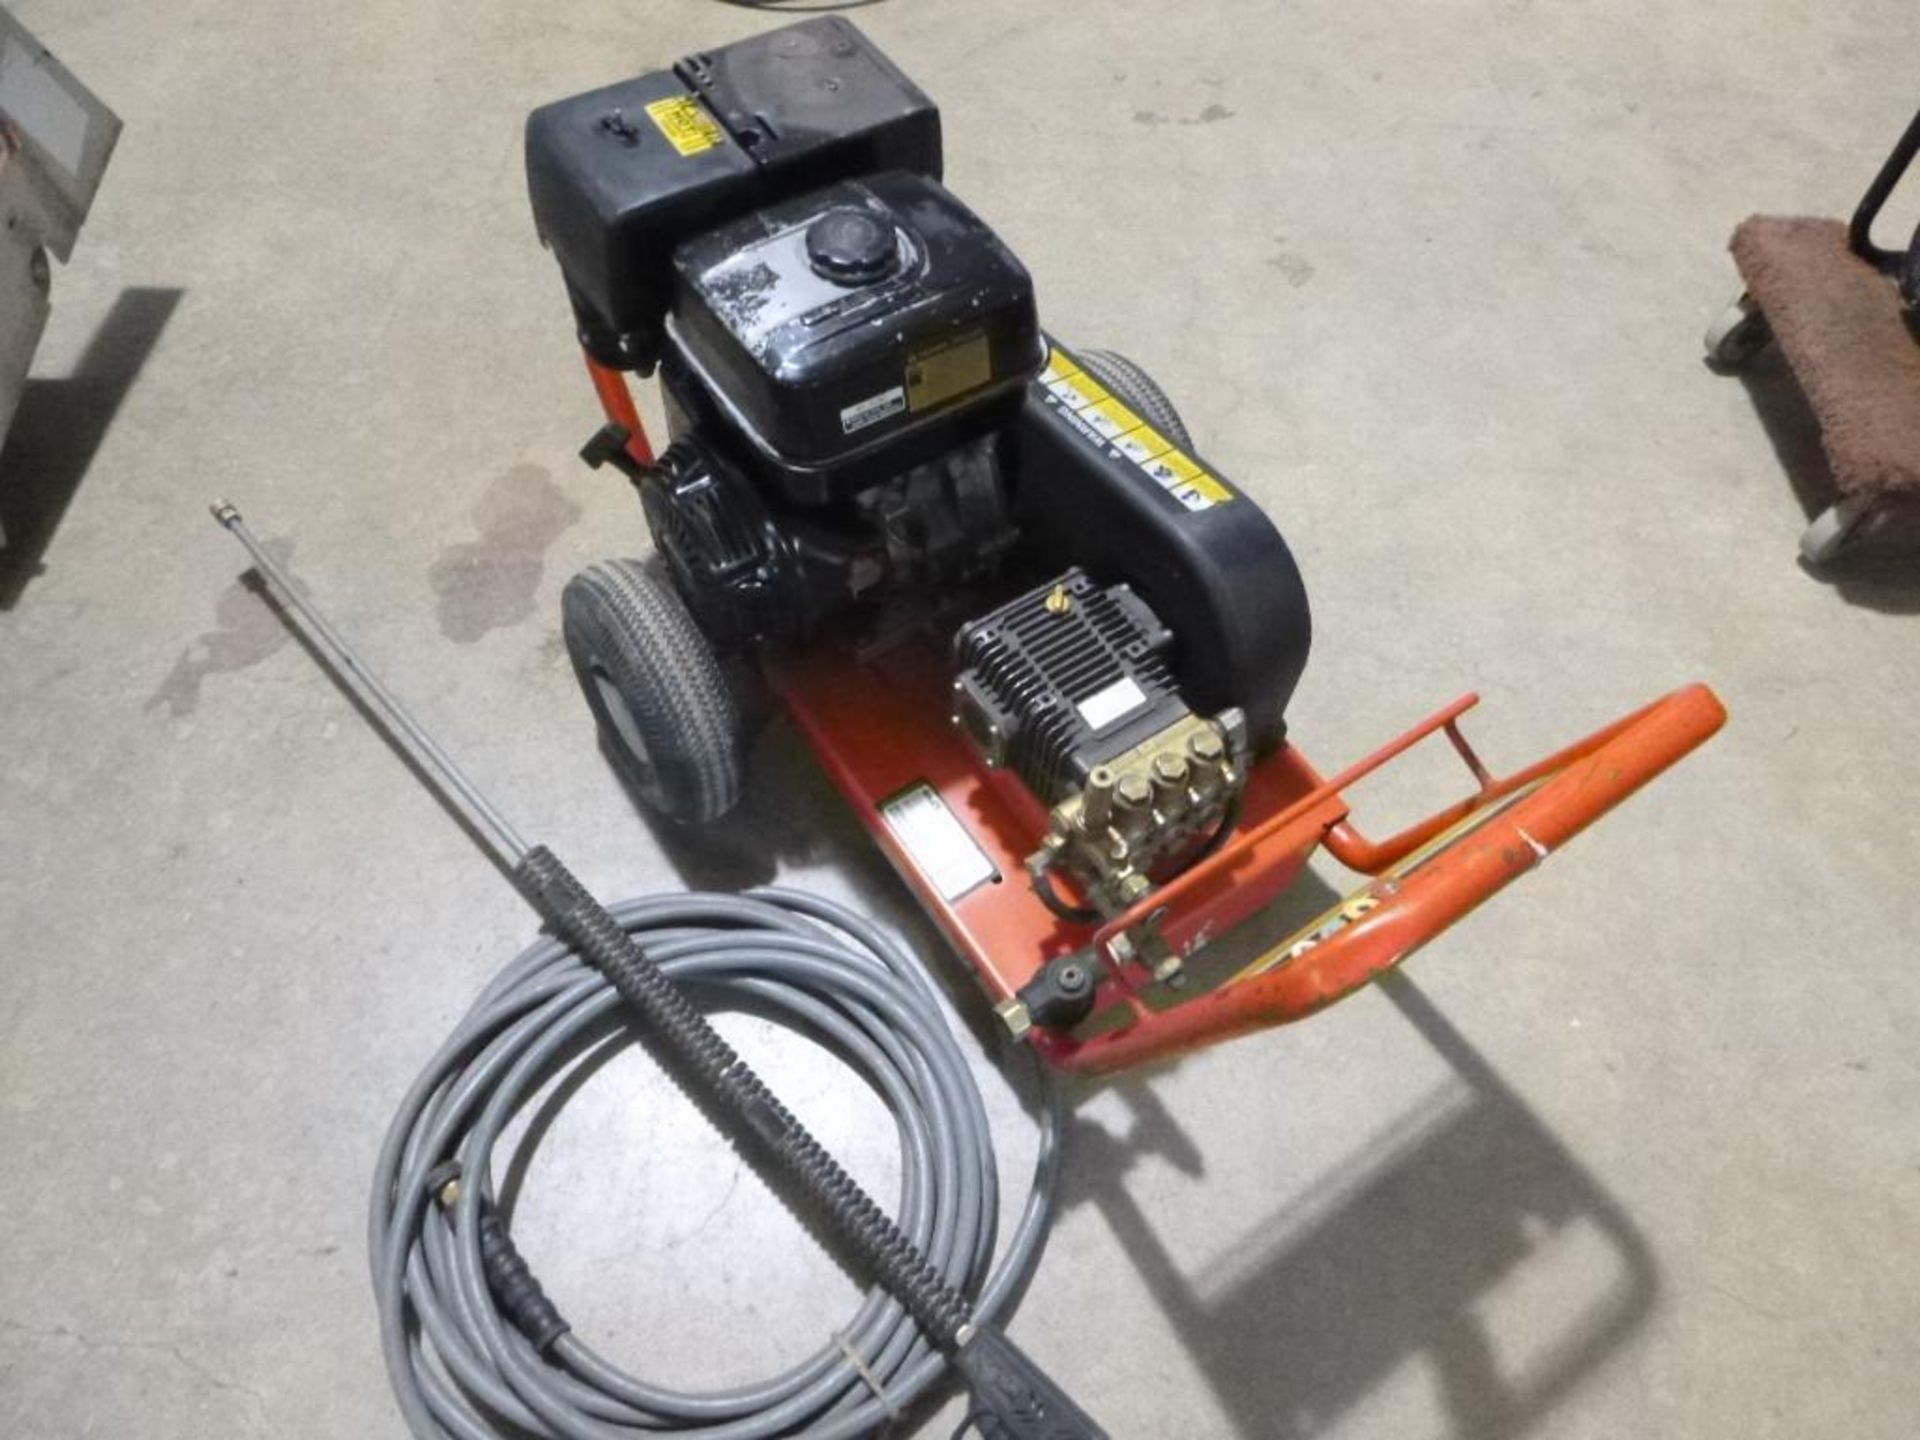 LOT: Washer, Pressure Cold 3000 PSI,; Washer, Pressure Hot 3000 PSI, Mi-TM HSP3003-3MGH - Image 2 of 6